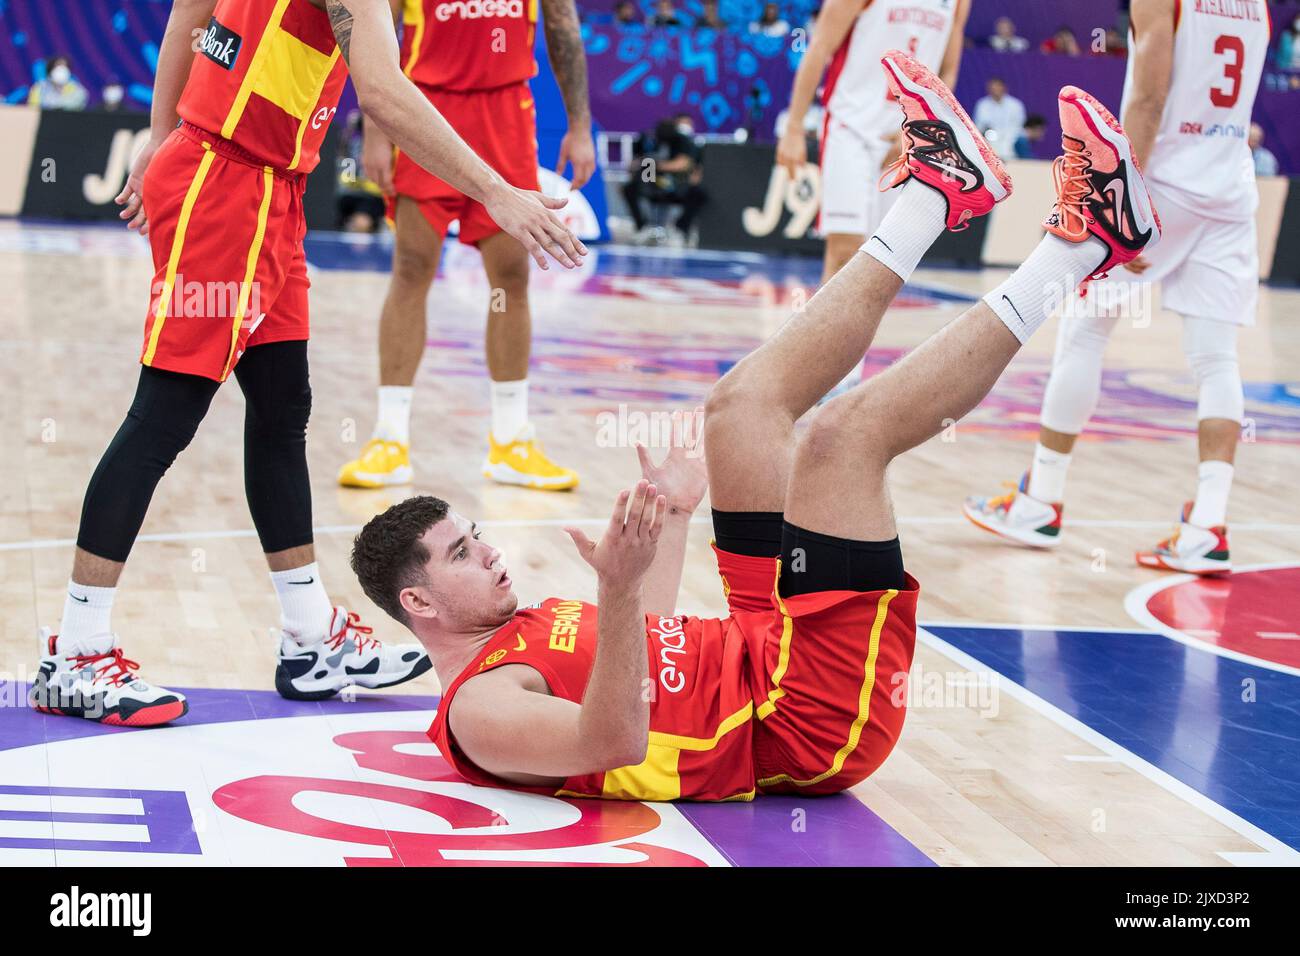 Tbilisi, Georgia, 6th September 2022. Joel Parra of Spain goes down during the FIBA EuroBasket 2022 group A match between Montenegro and Spain at Tbilisi Arena in Tbilisi, Georgia. September 6, 2022. Credit: Nikola Krstic/Alamy Stock Photo